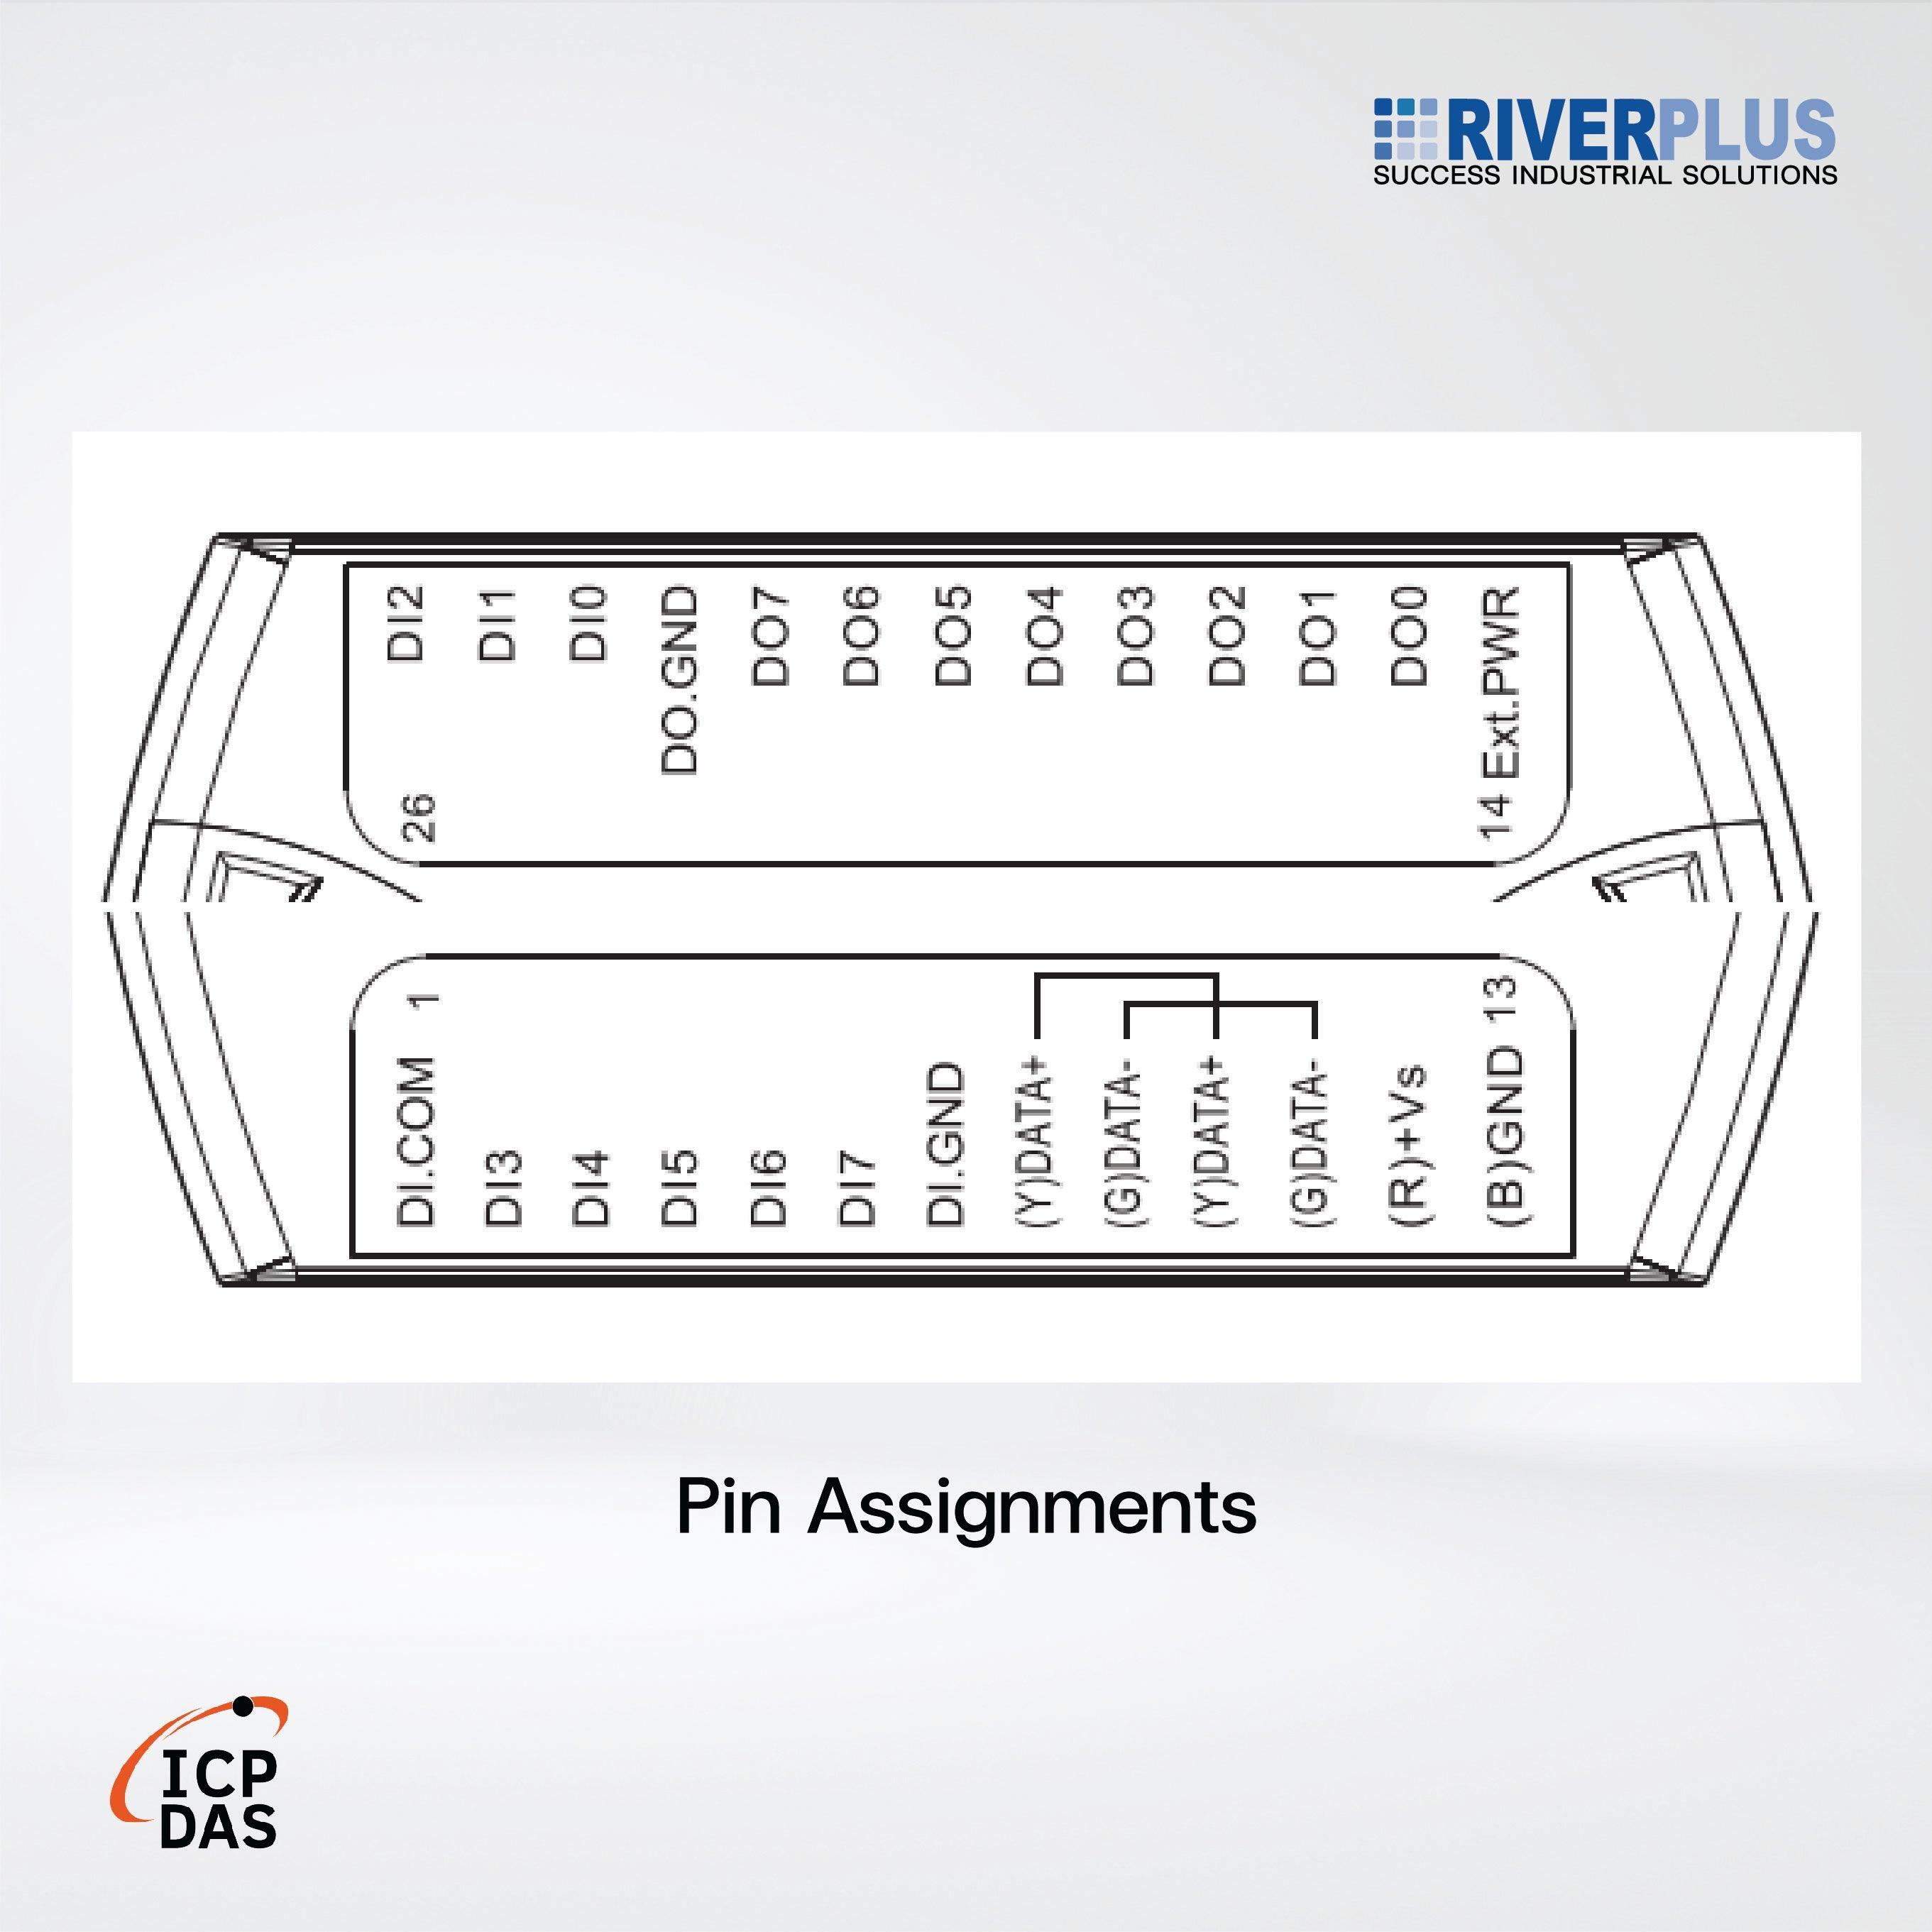 M-7055D-G 8-ch Isolated (Dry, Wet) DI and 8-ch Isolated DO Module LED Display - Riverplus